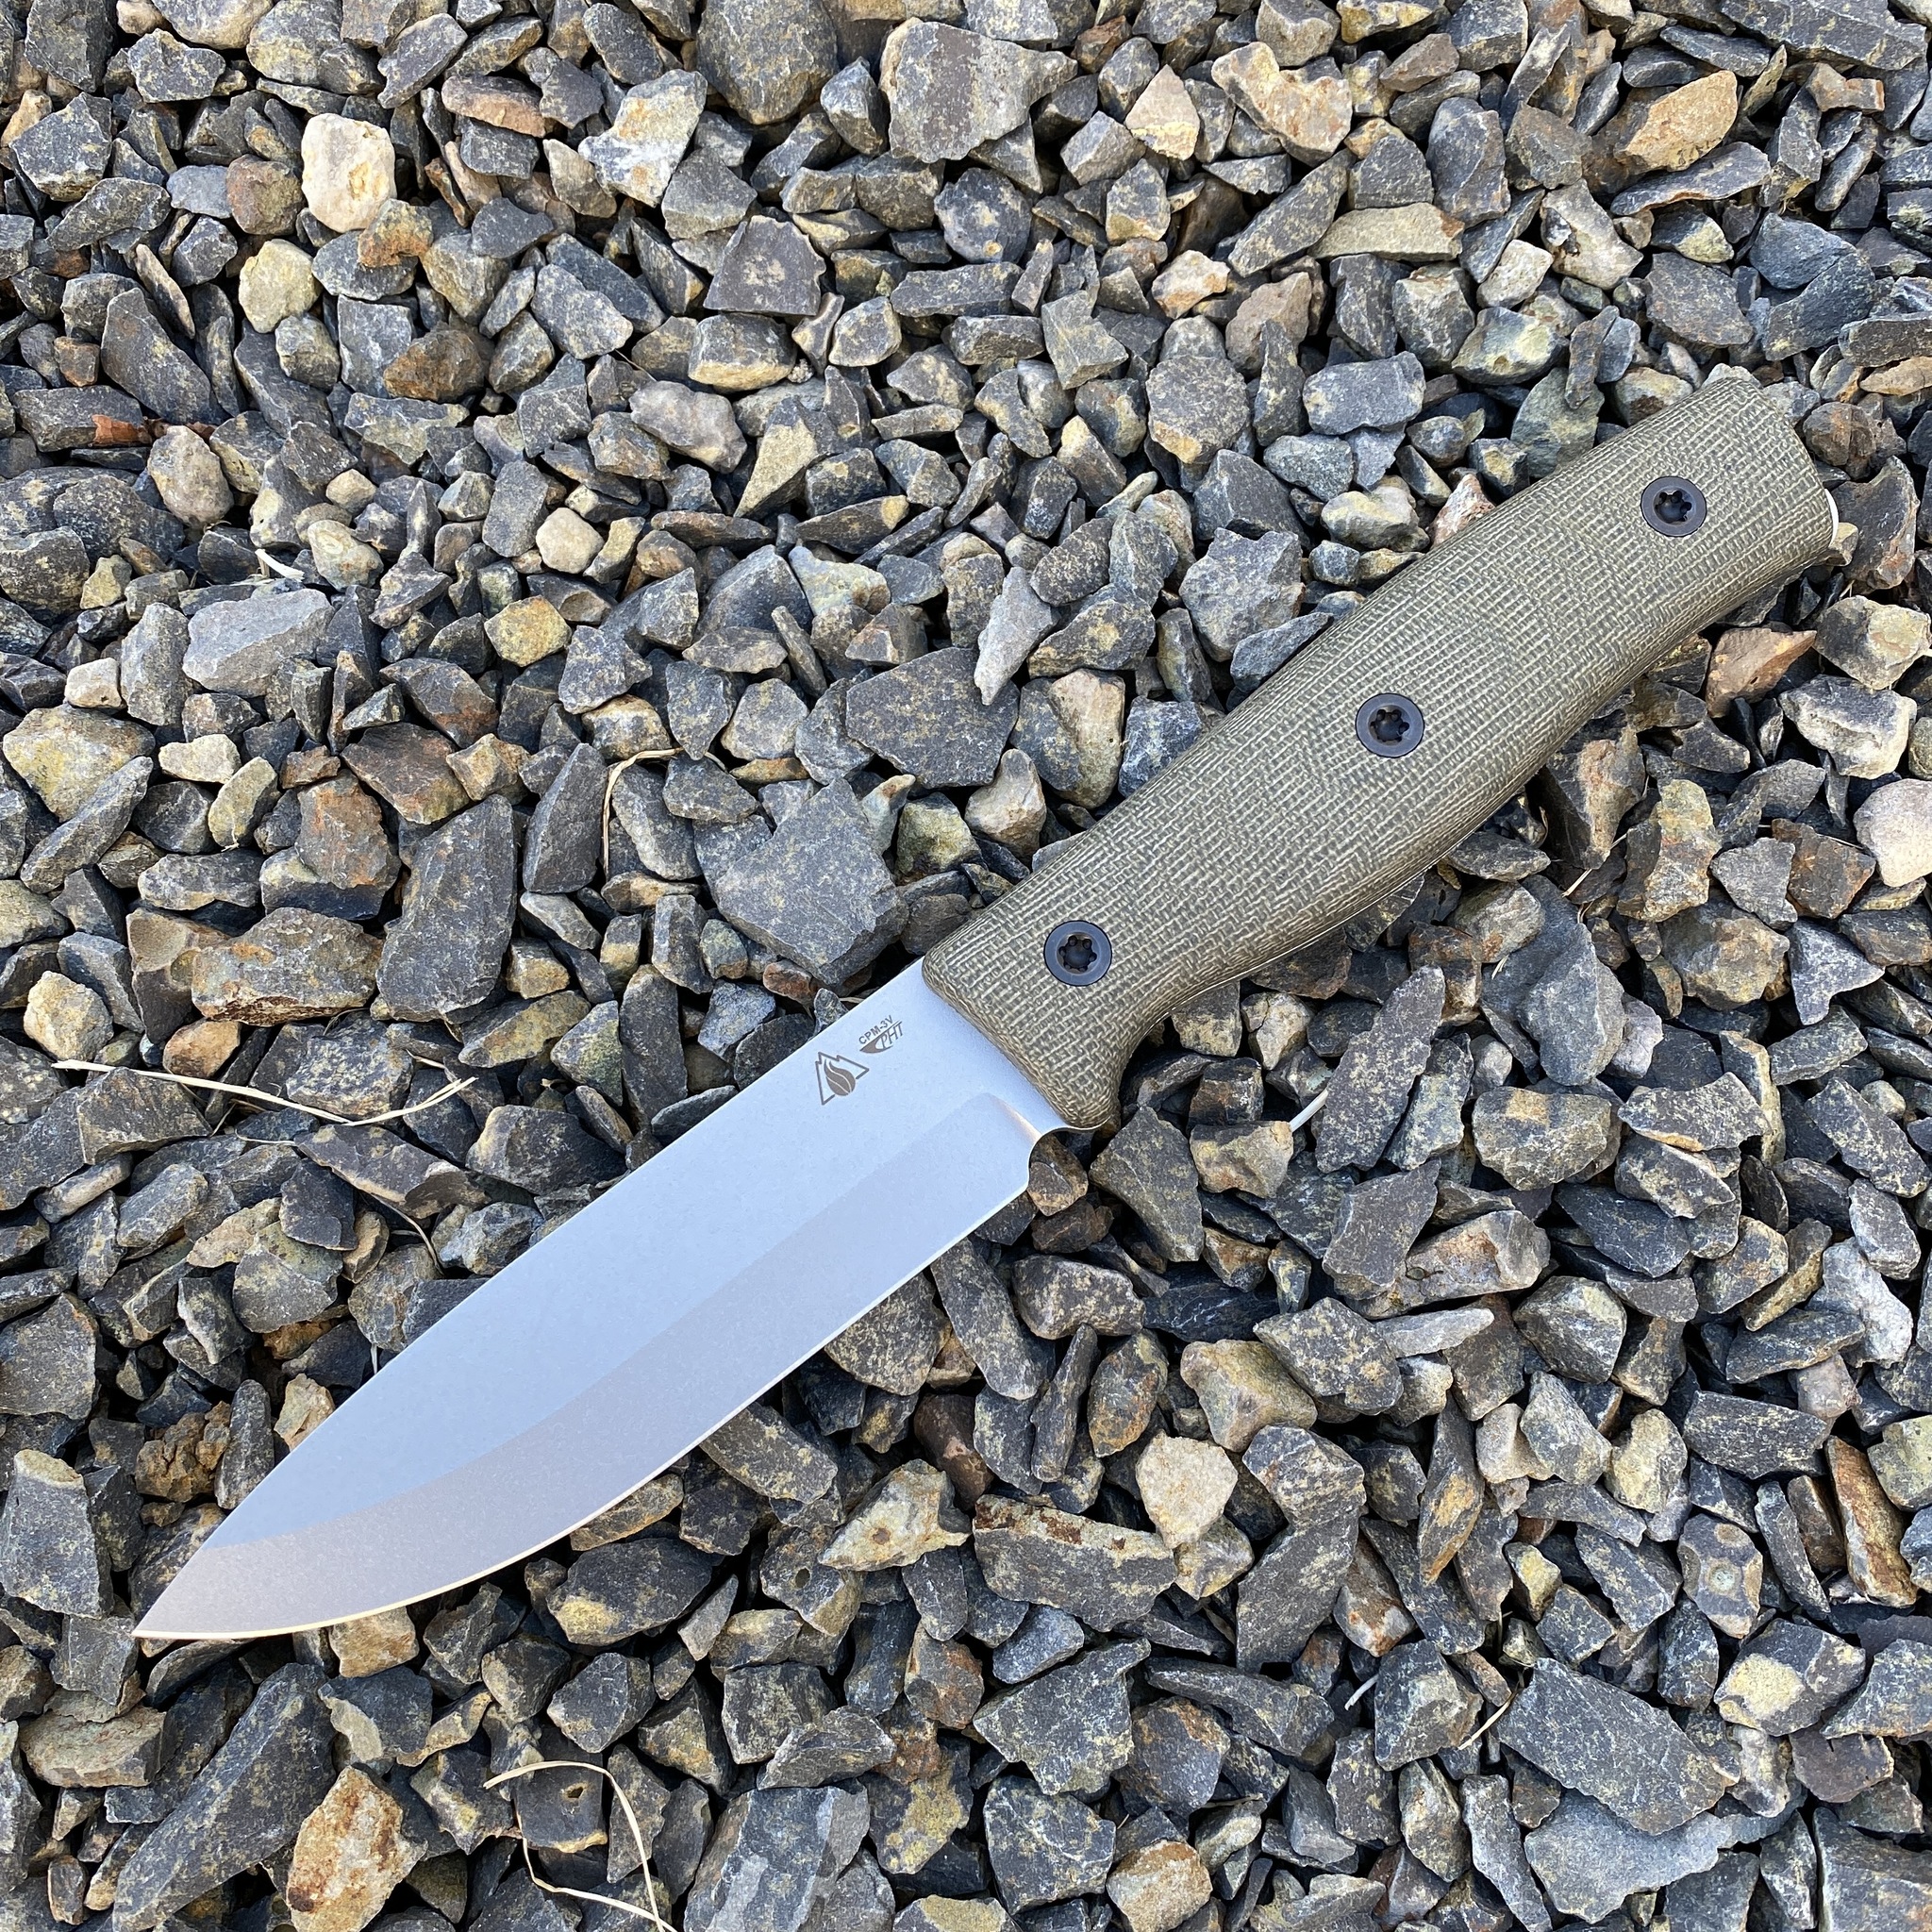 Survival knives vs bushcraft knives: what do you need to take into account?